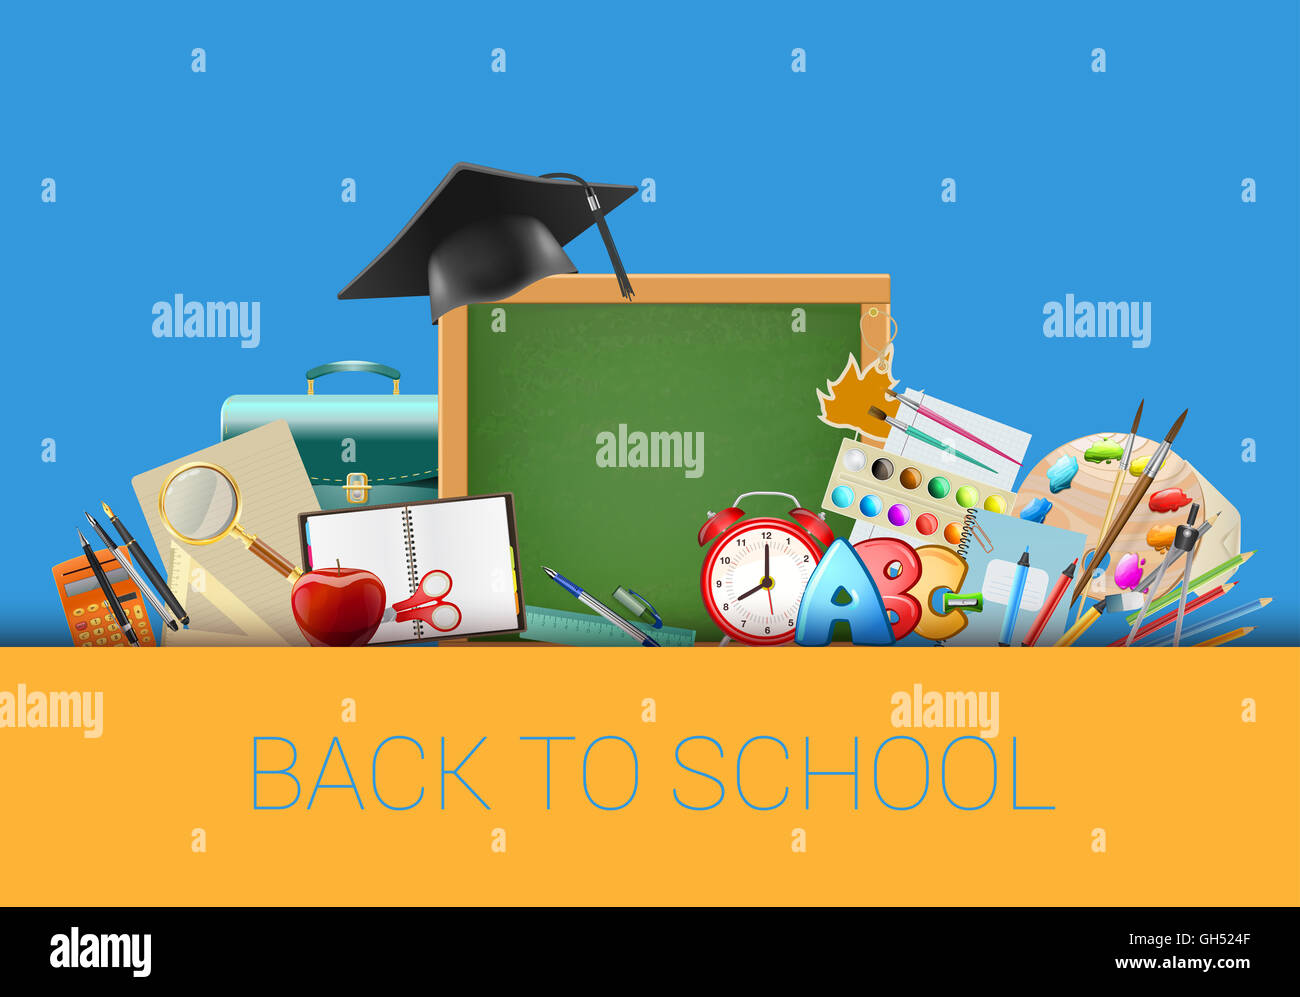 Back to school blue background with chalkboard, graduation cap, supplies, education workplace accessories Stock Photo